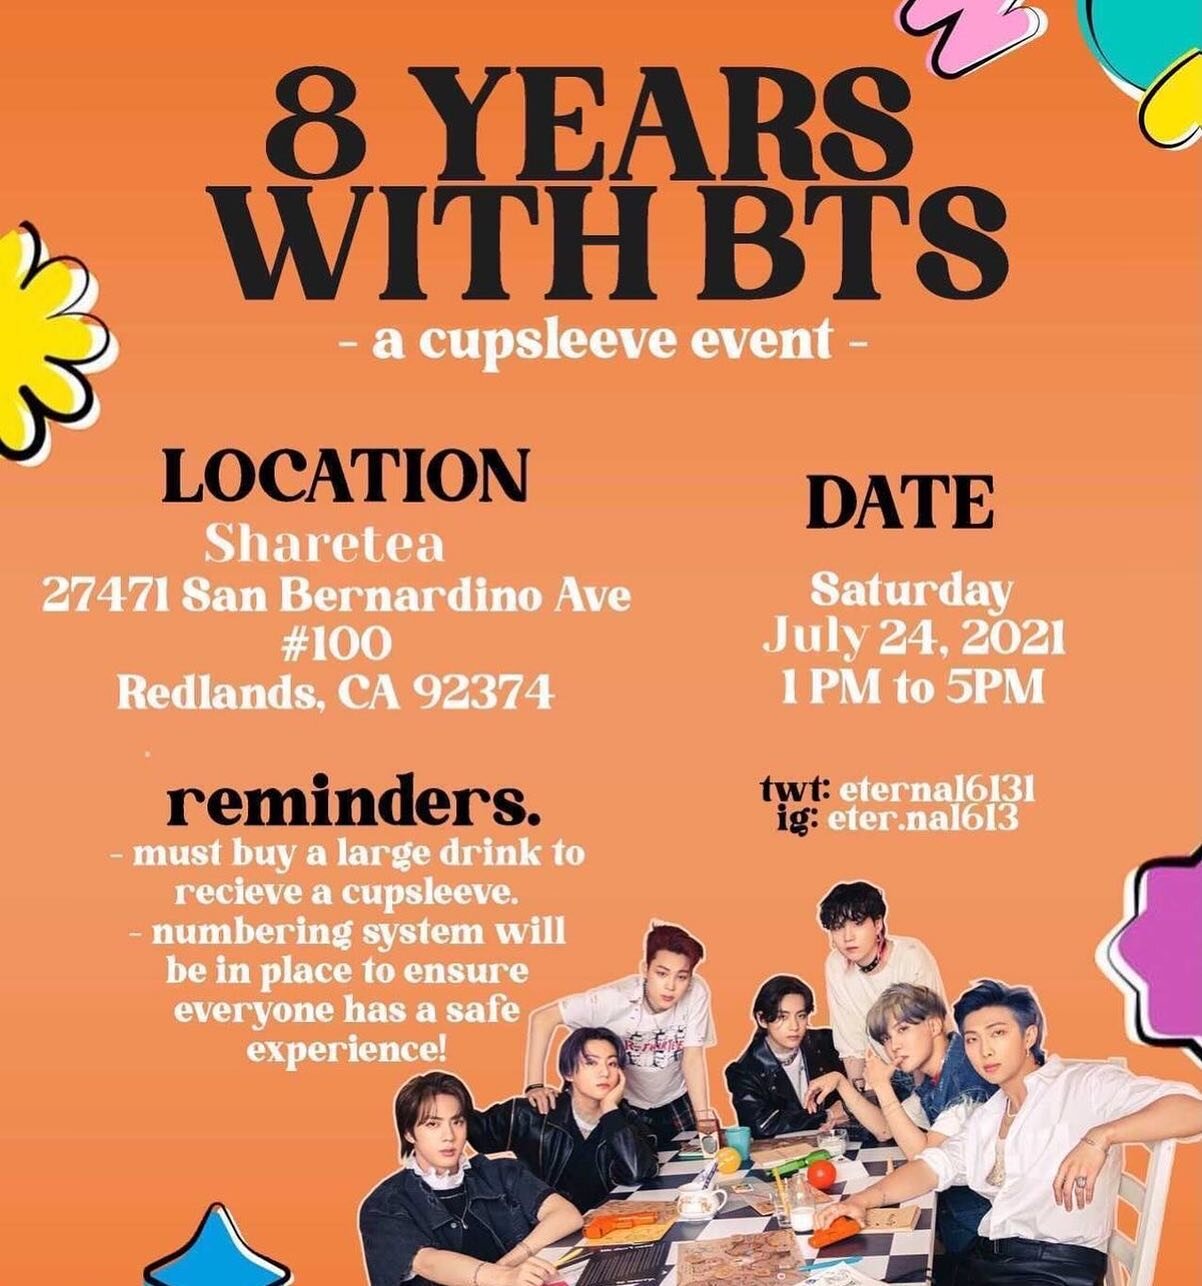 🌟 SAVE THE DATE! 🌟 

We&rsquo;re so excited to be hosting a BTS cup sleeve event with @eter.nal613 on July 24th 1-5PM! Come celebrate BTS&rsquo; 8 year anniversary with us! 🥳🧋

Keep an eye out for a special giveaway and follow @eter.nal613 for mo